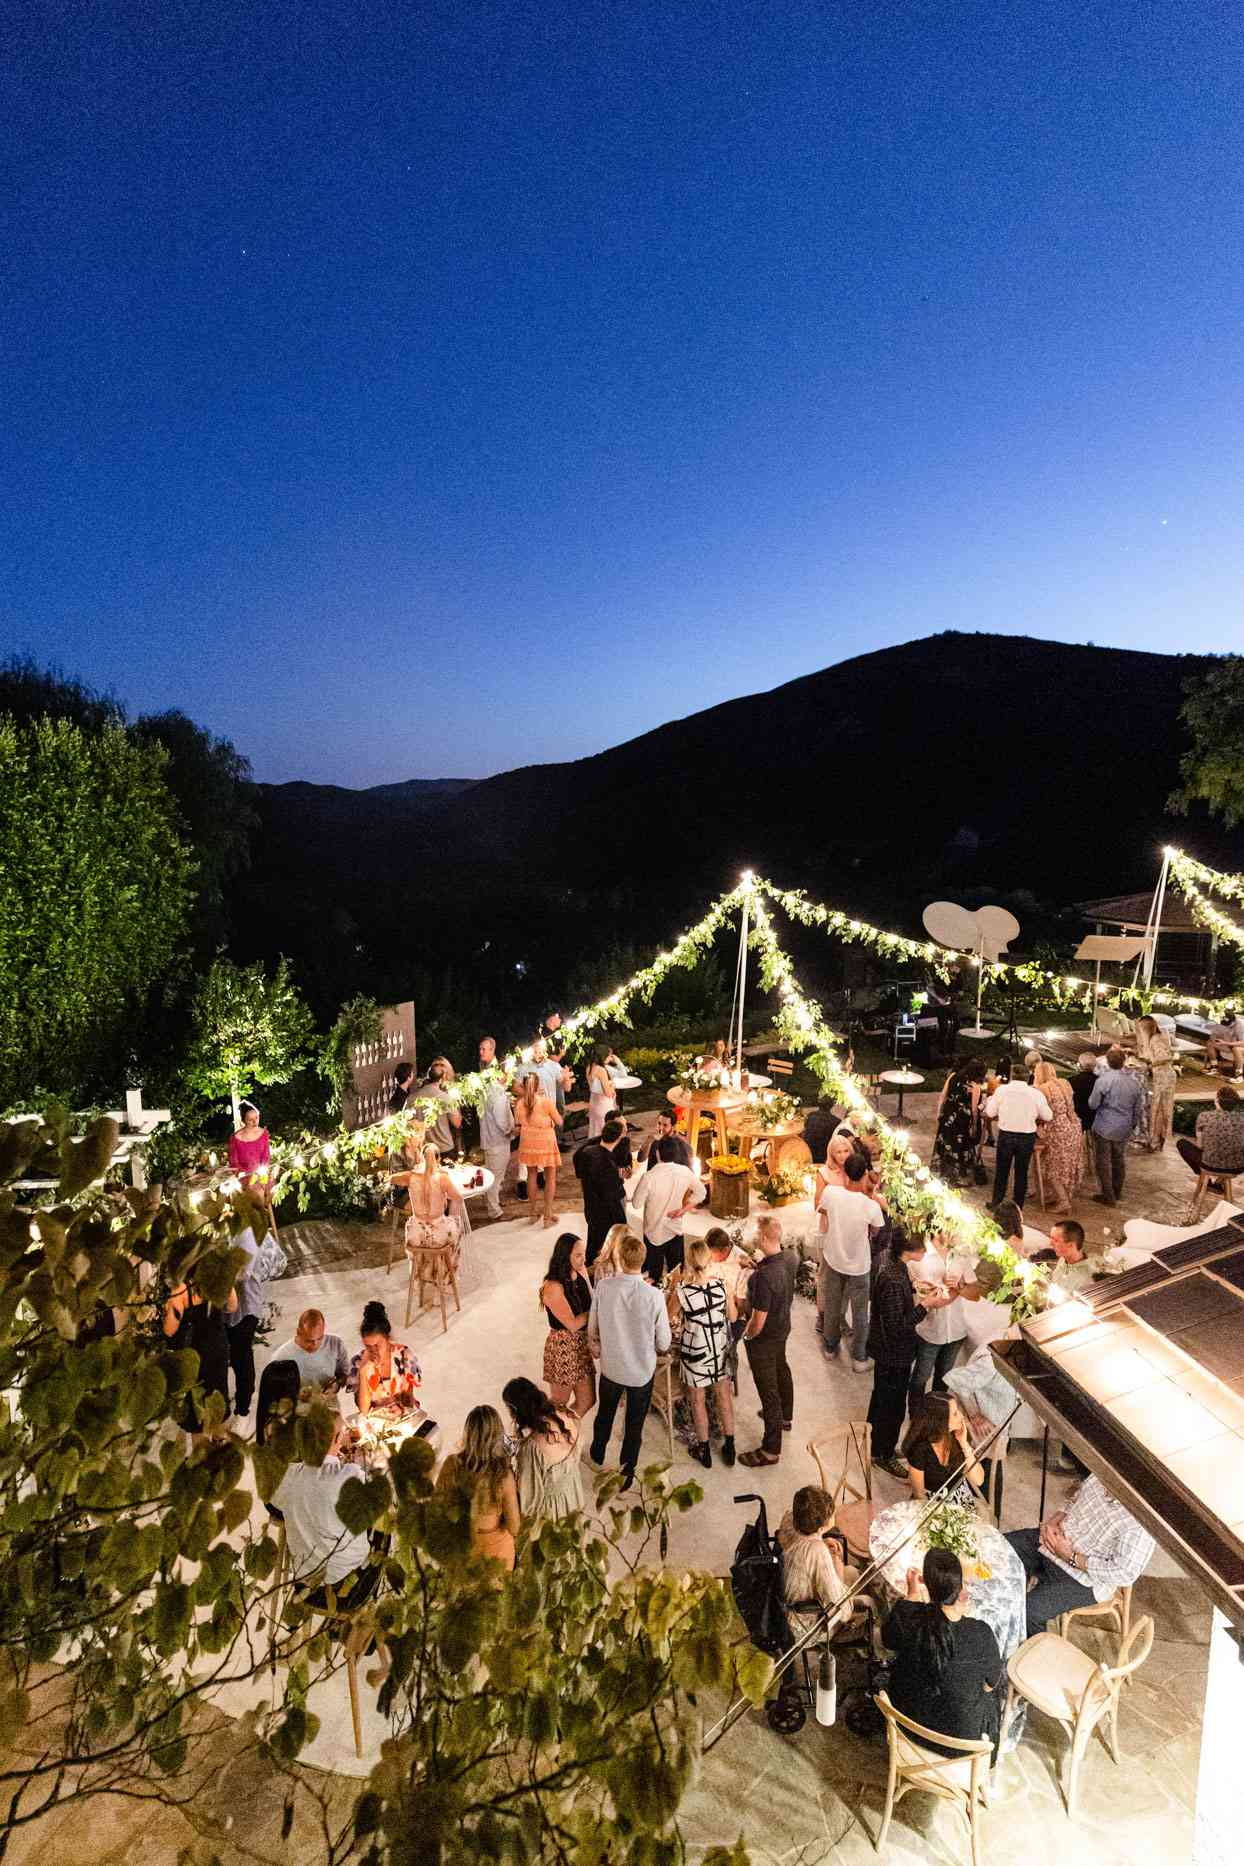 outdoor engagement party with string lights overlooking the mountains